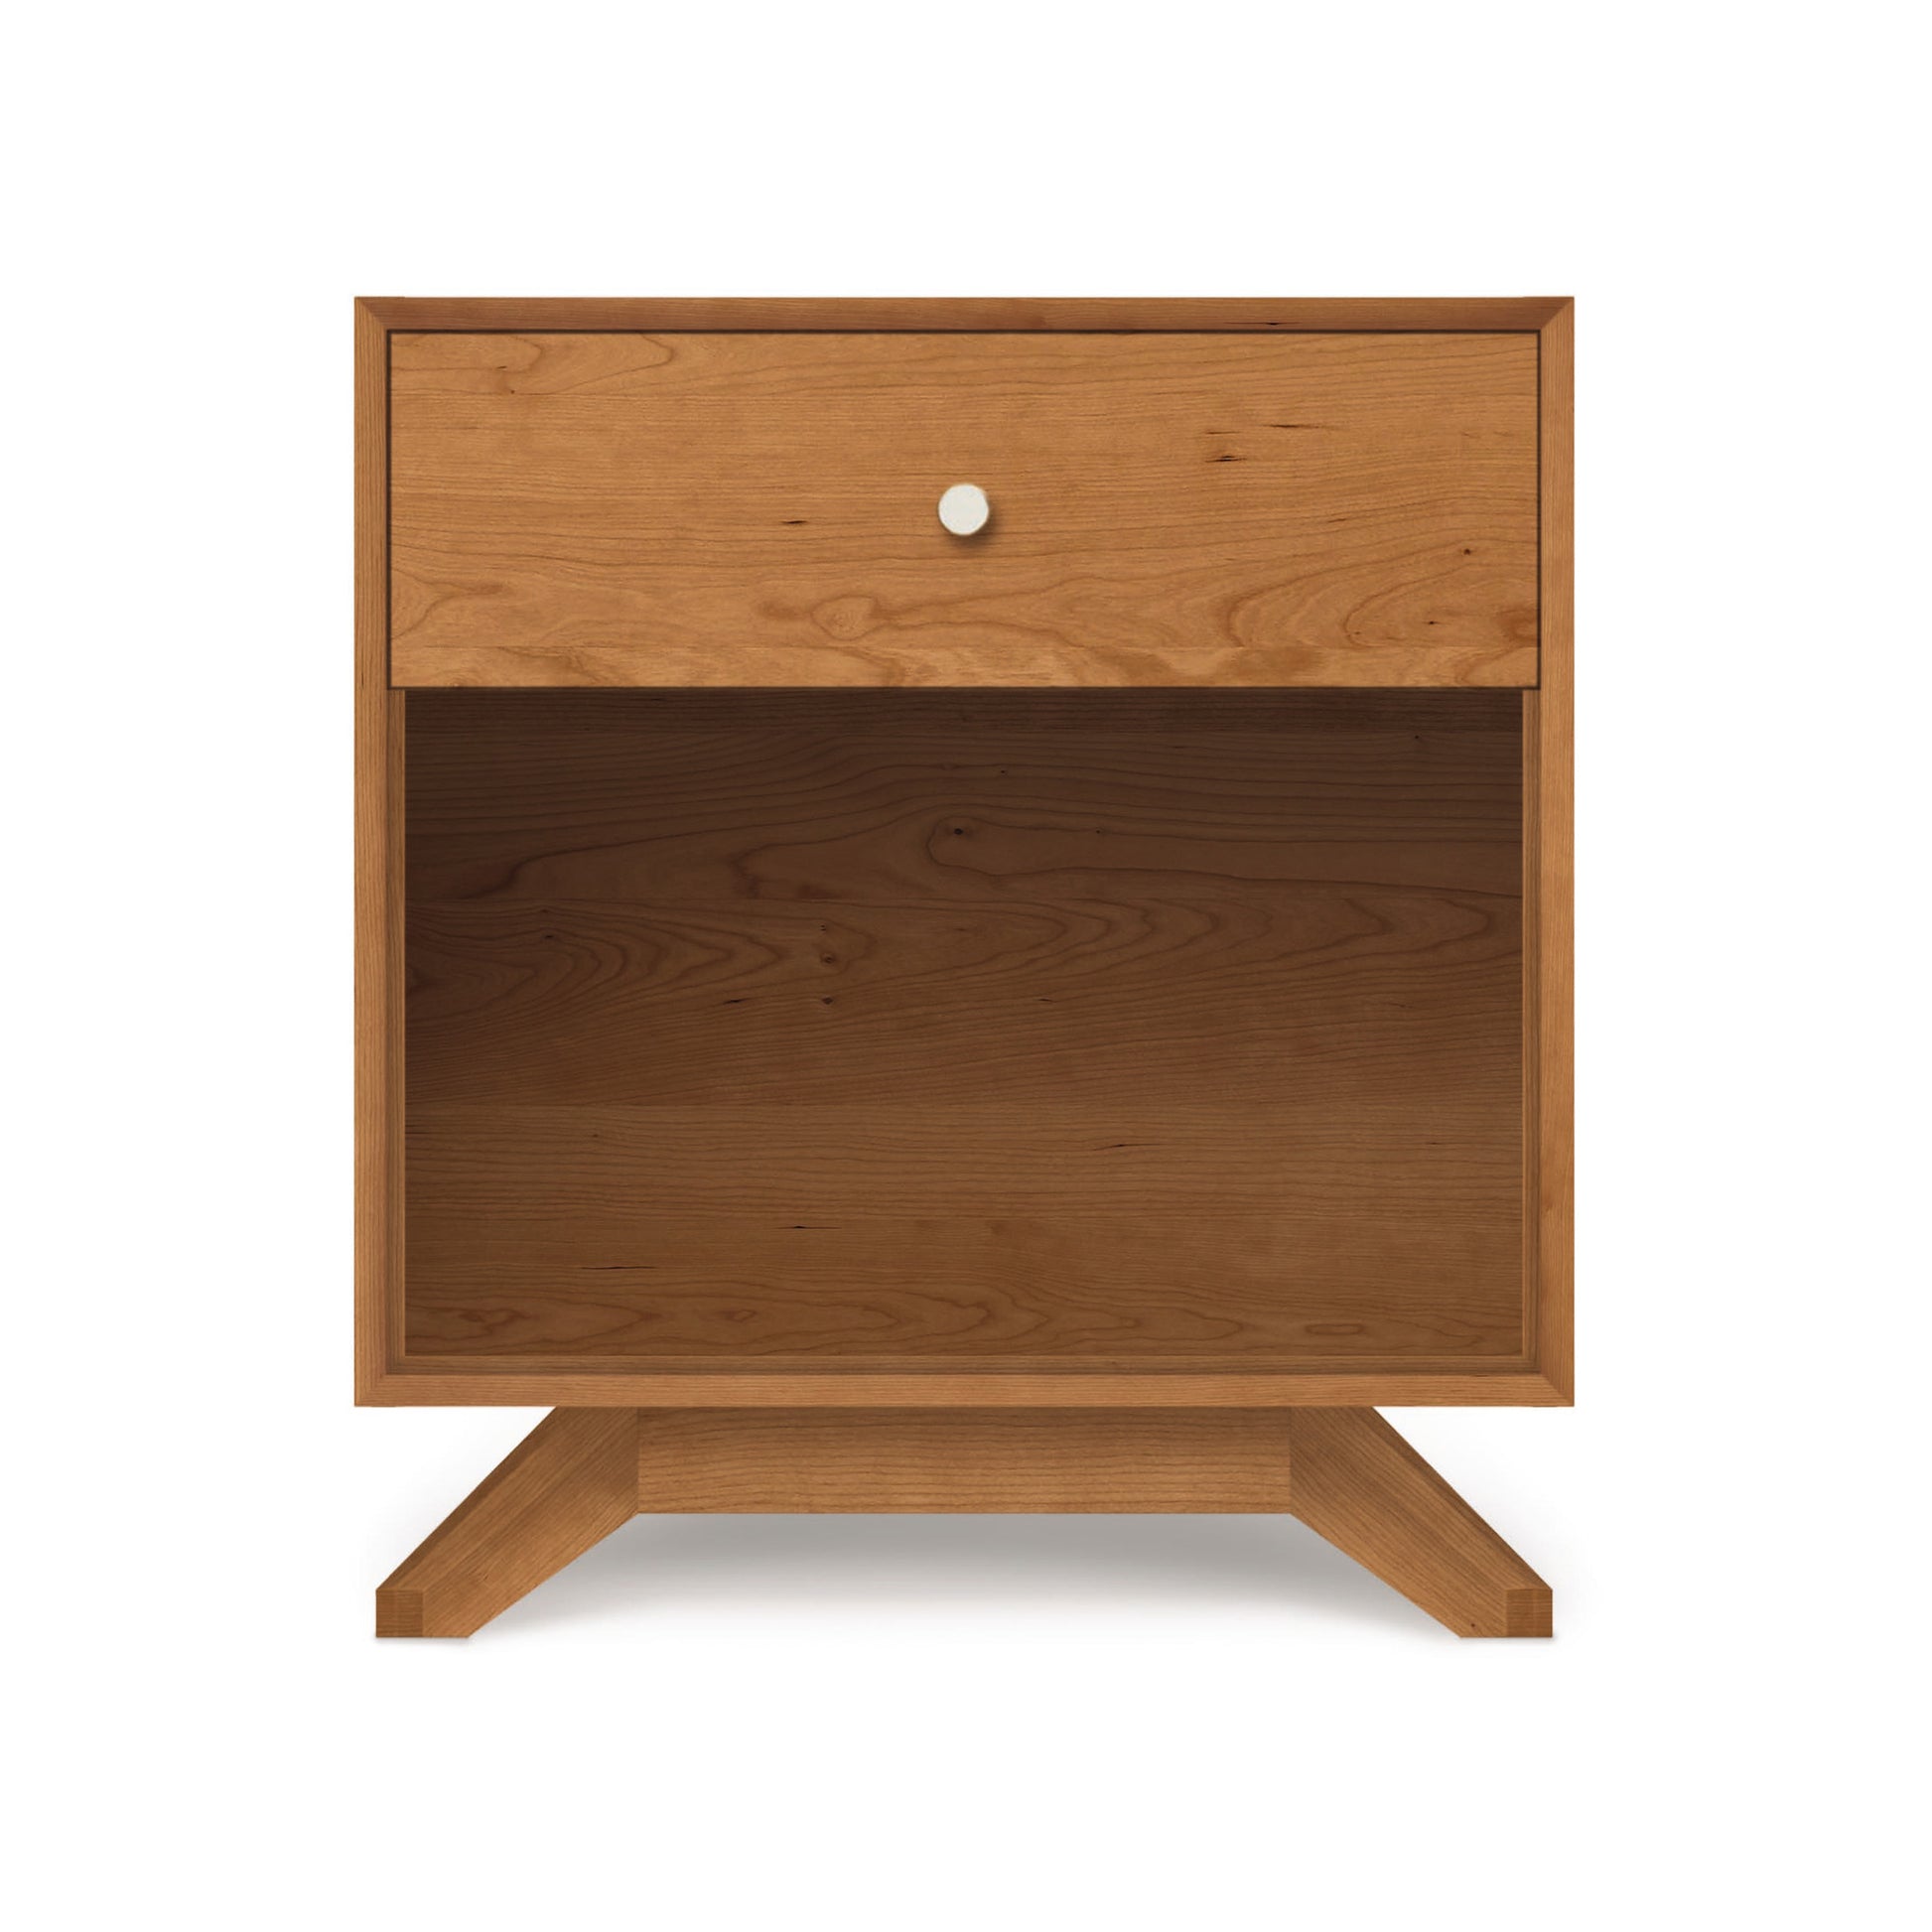 A Copeland Furniture Astrid 1-Drawer Enclosed Shelf Nightstand, crafted from sustainable hardwood, against a plain background.